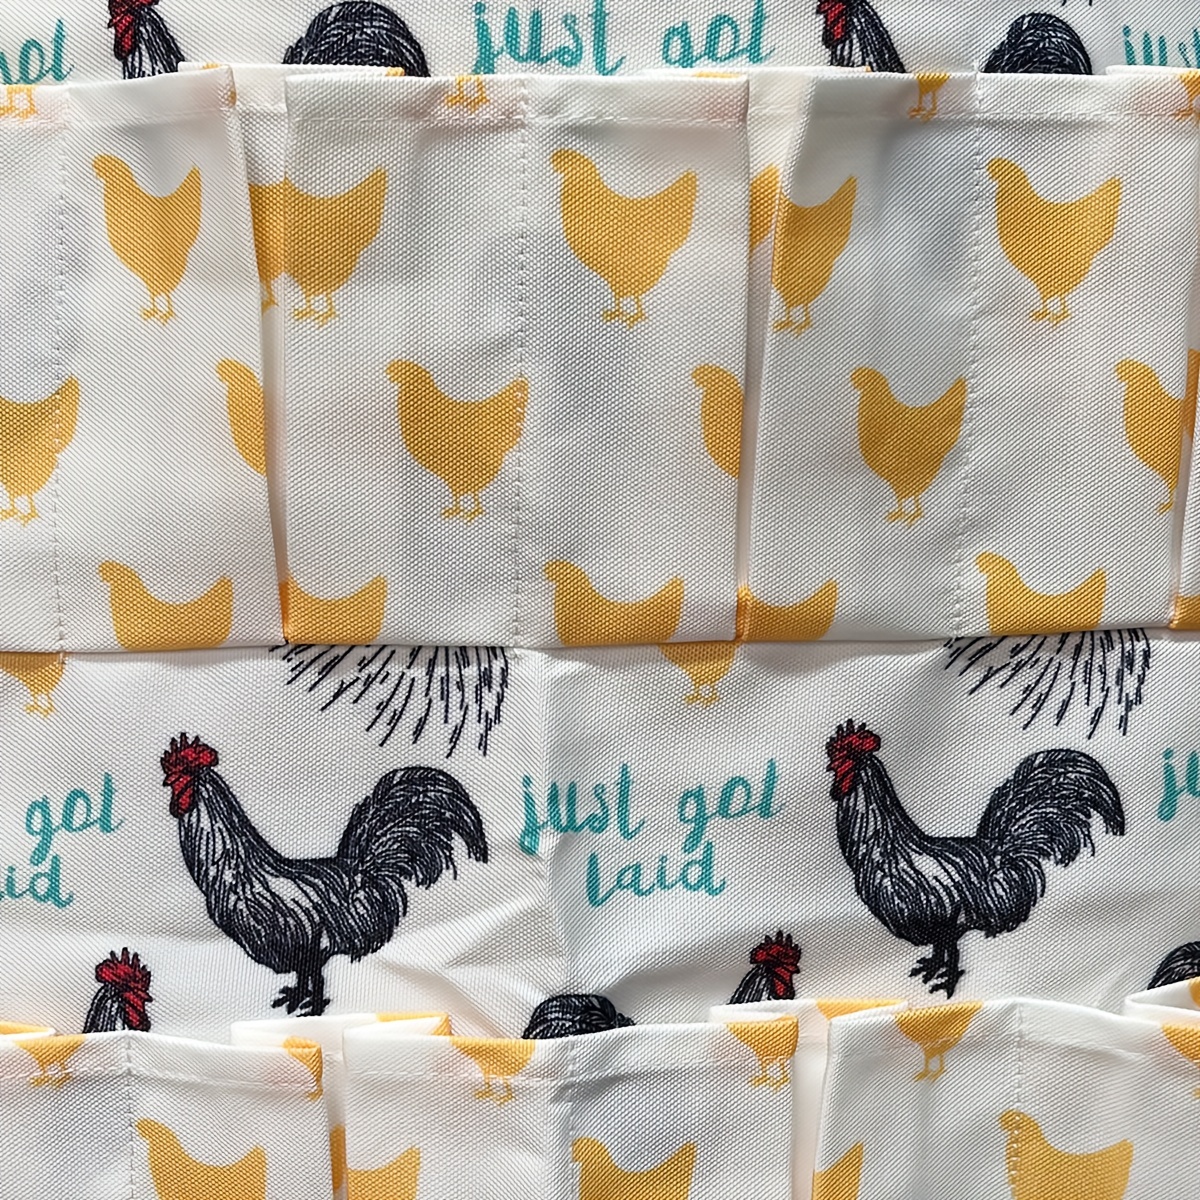 Egg Collecting Apron, 12 Hen Pockets With Hen Rooster Print And